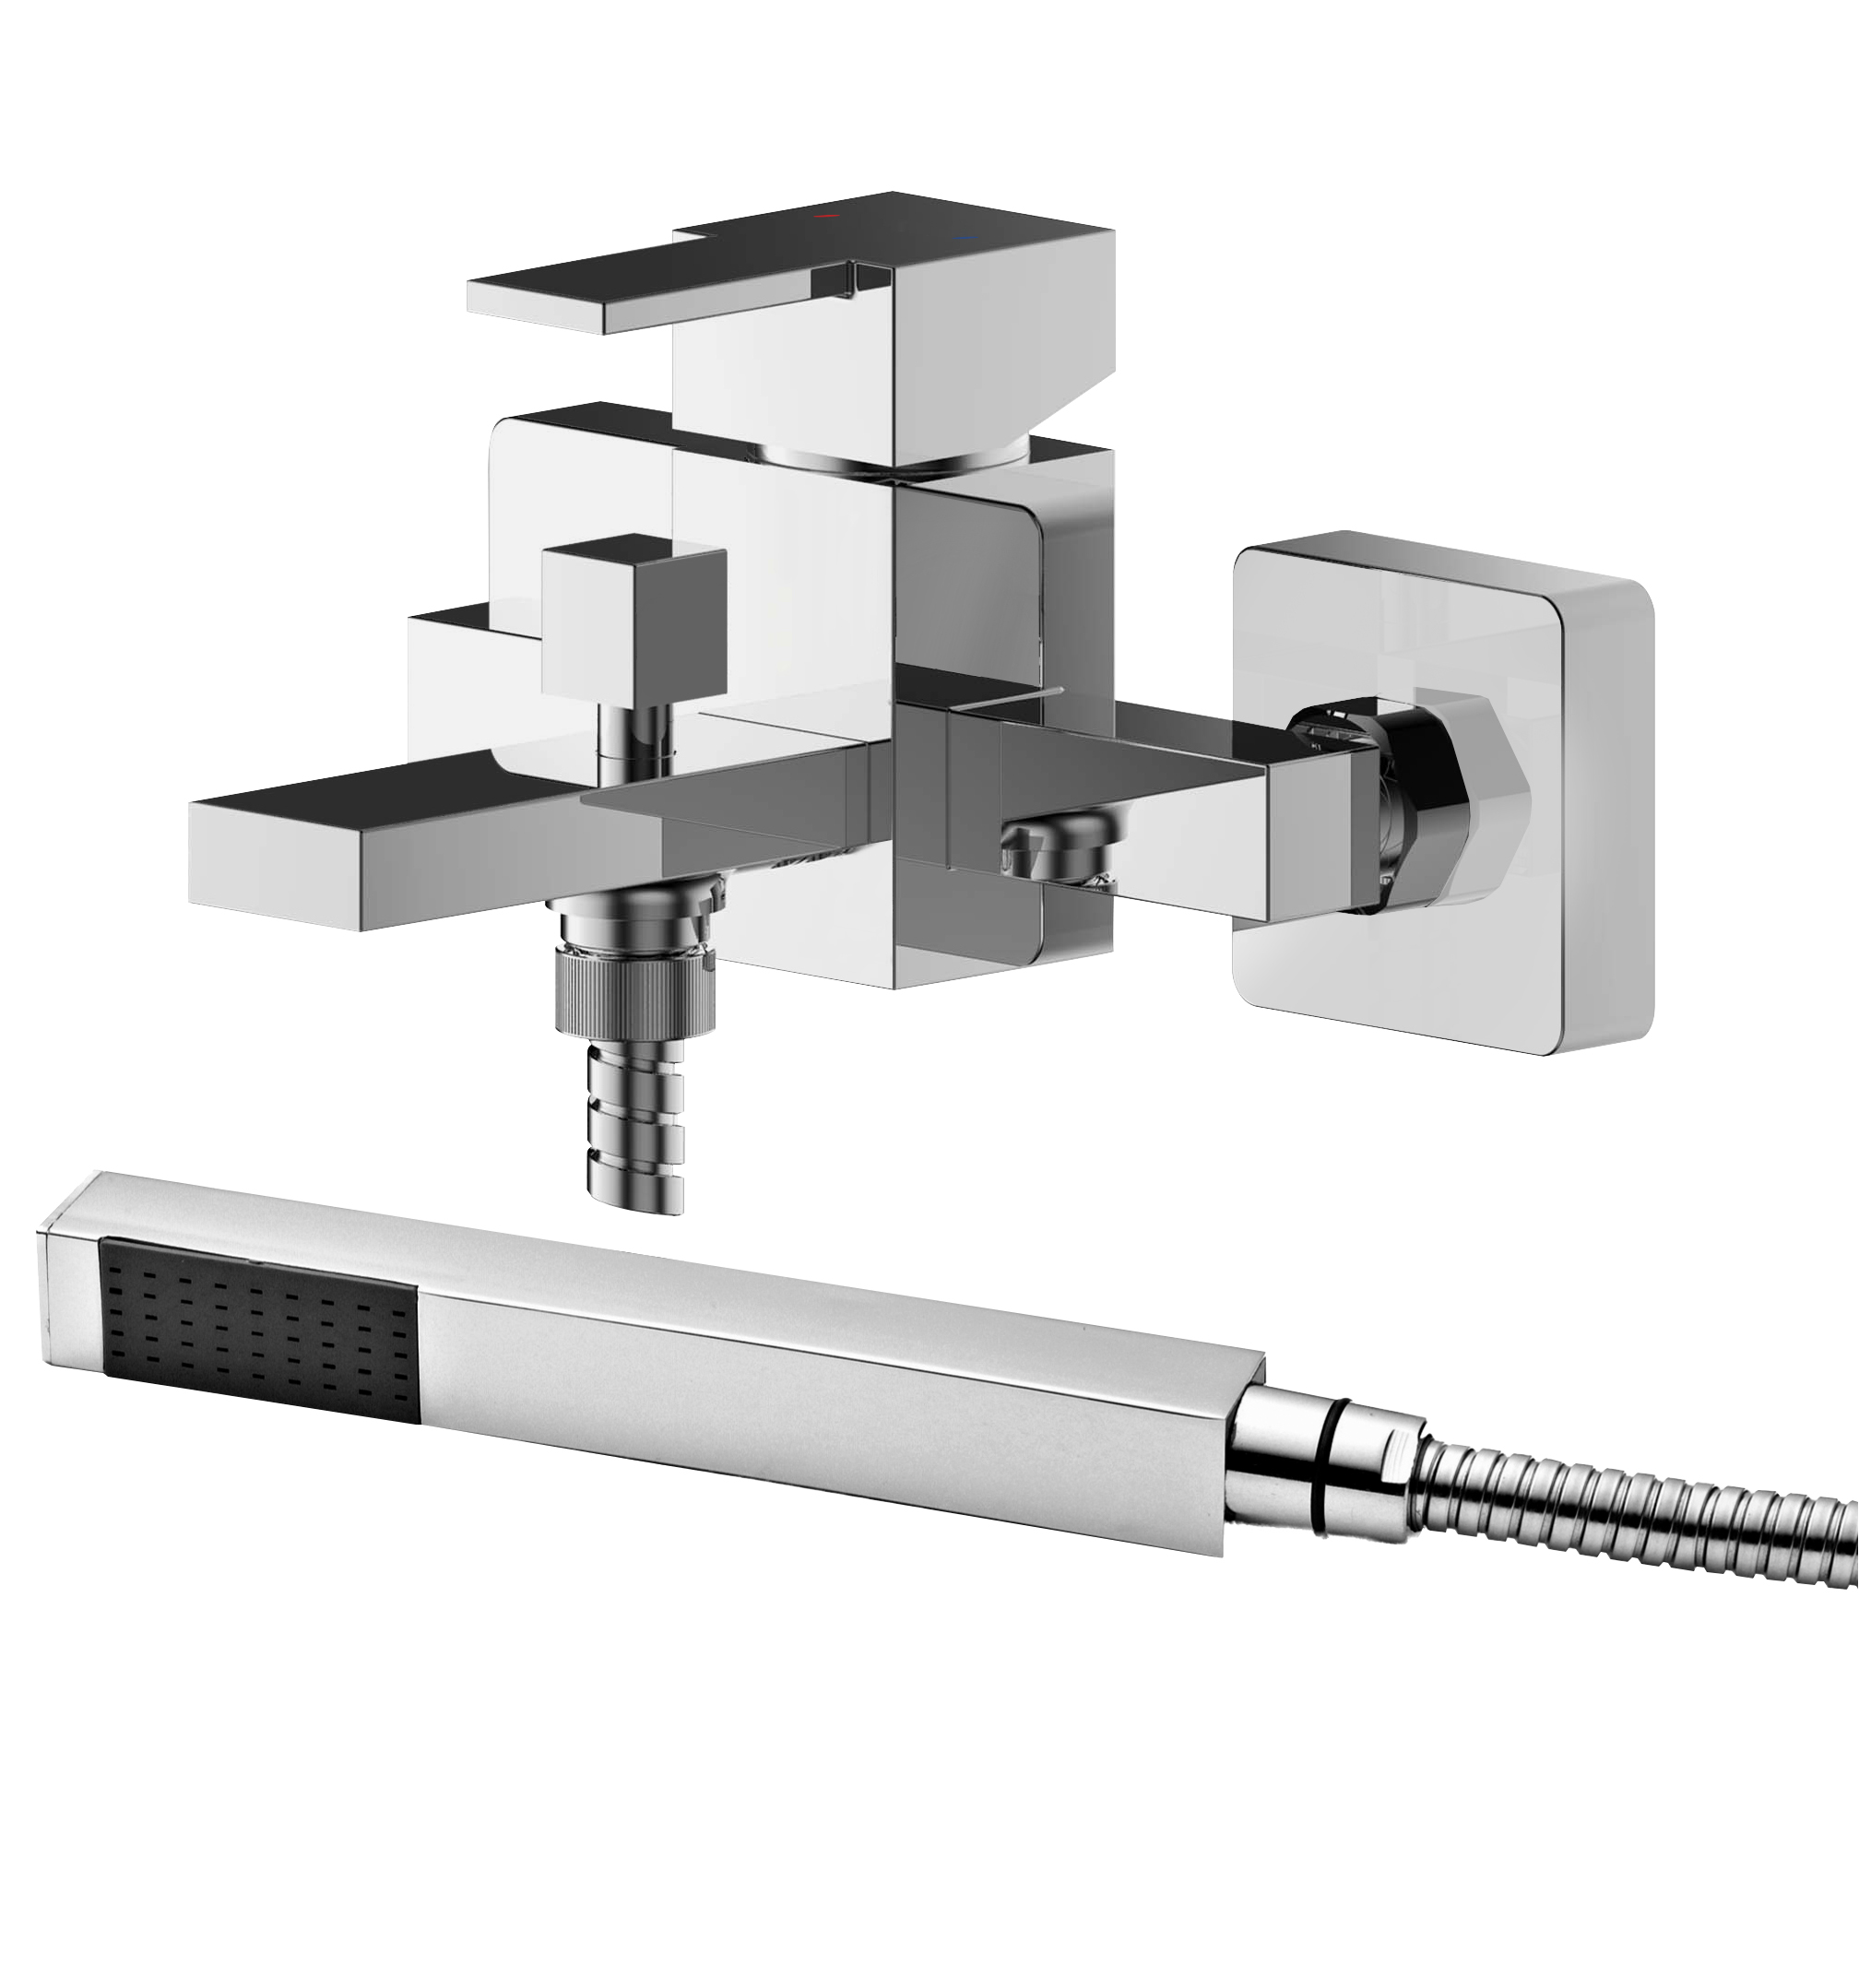 Ripple Wall Mount Square Bath Shower Mixer Tap with Shower Kit - Chrome